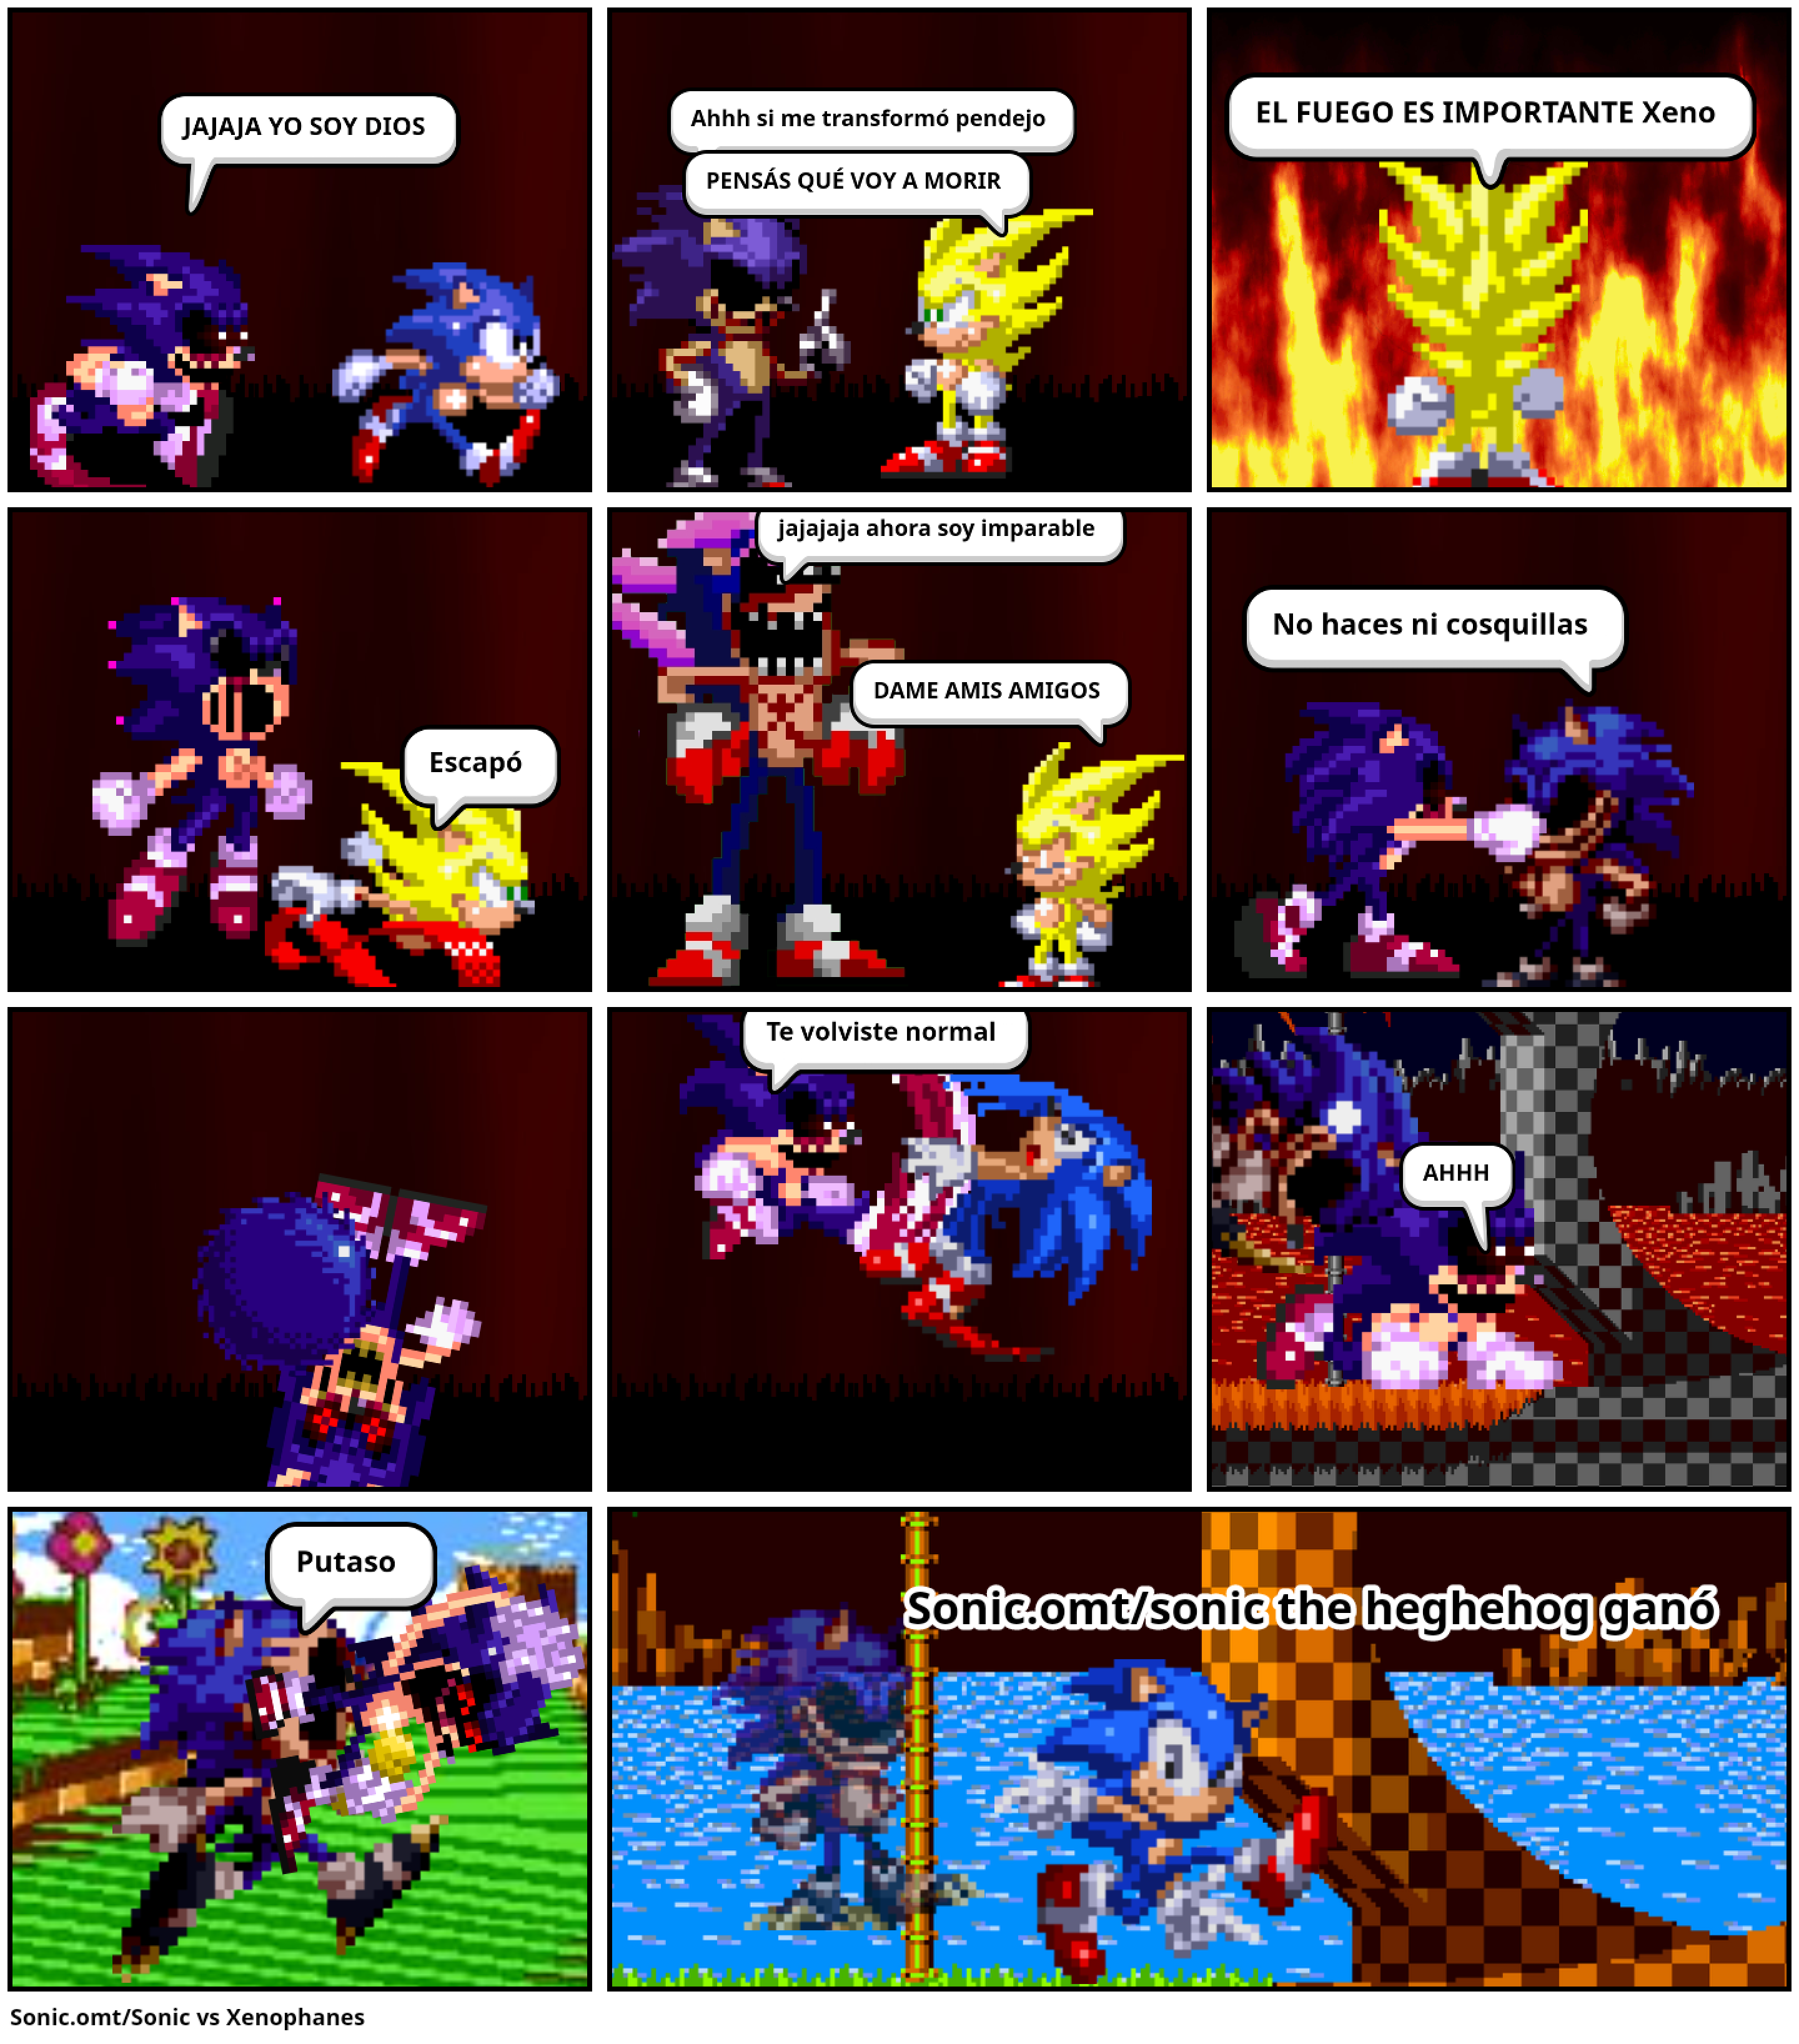 Sonic.omt/Sonic vs Xenophanes 